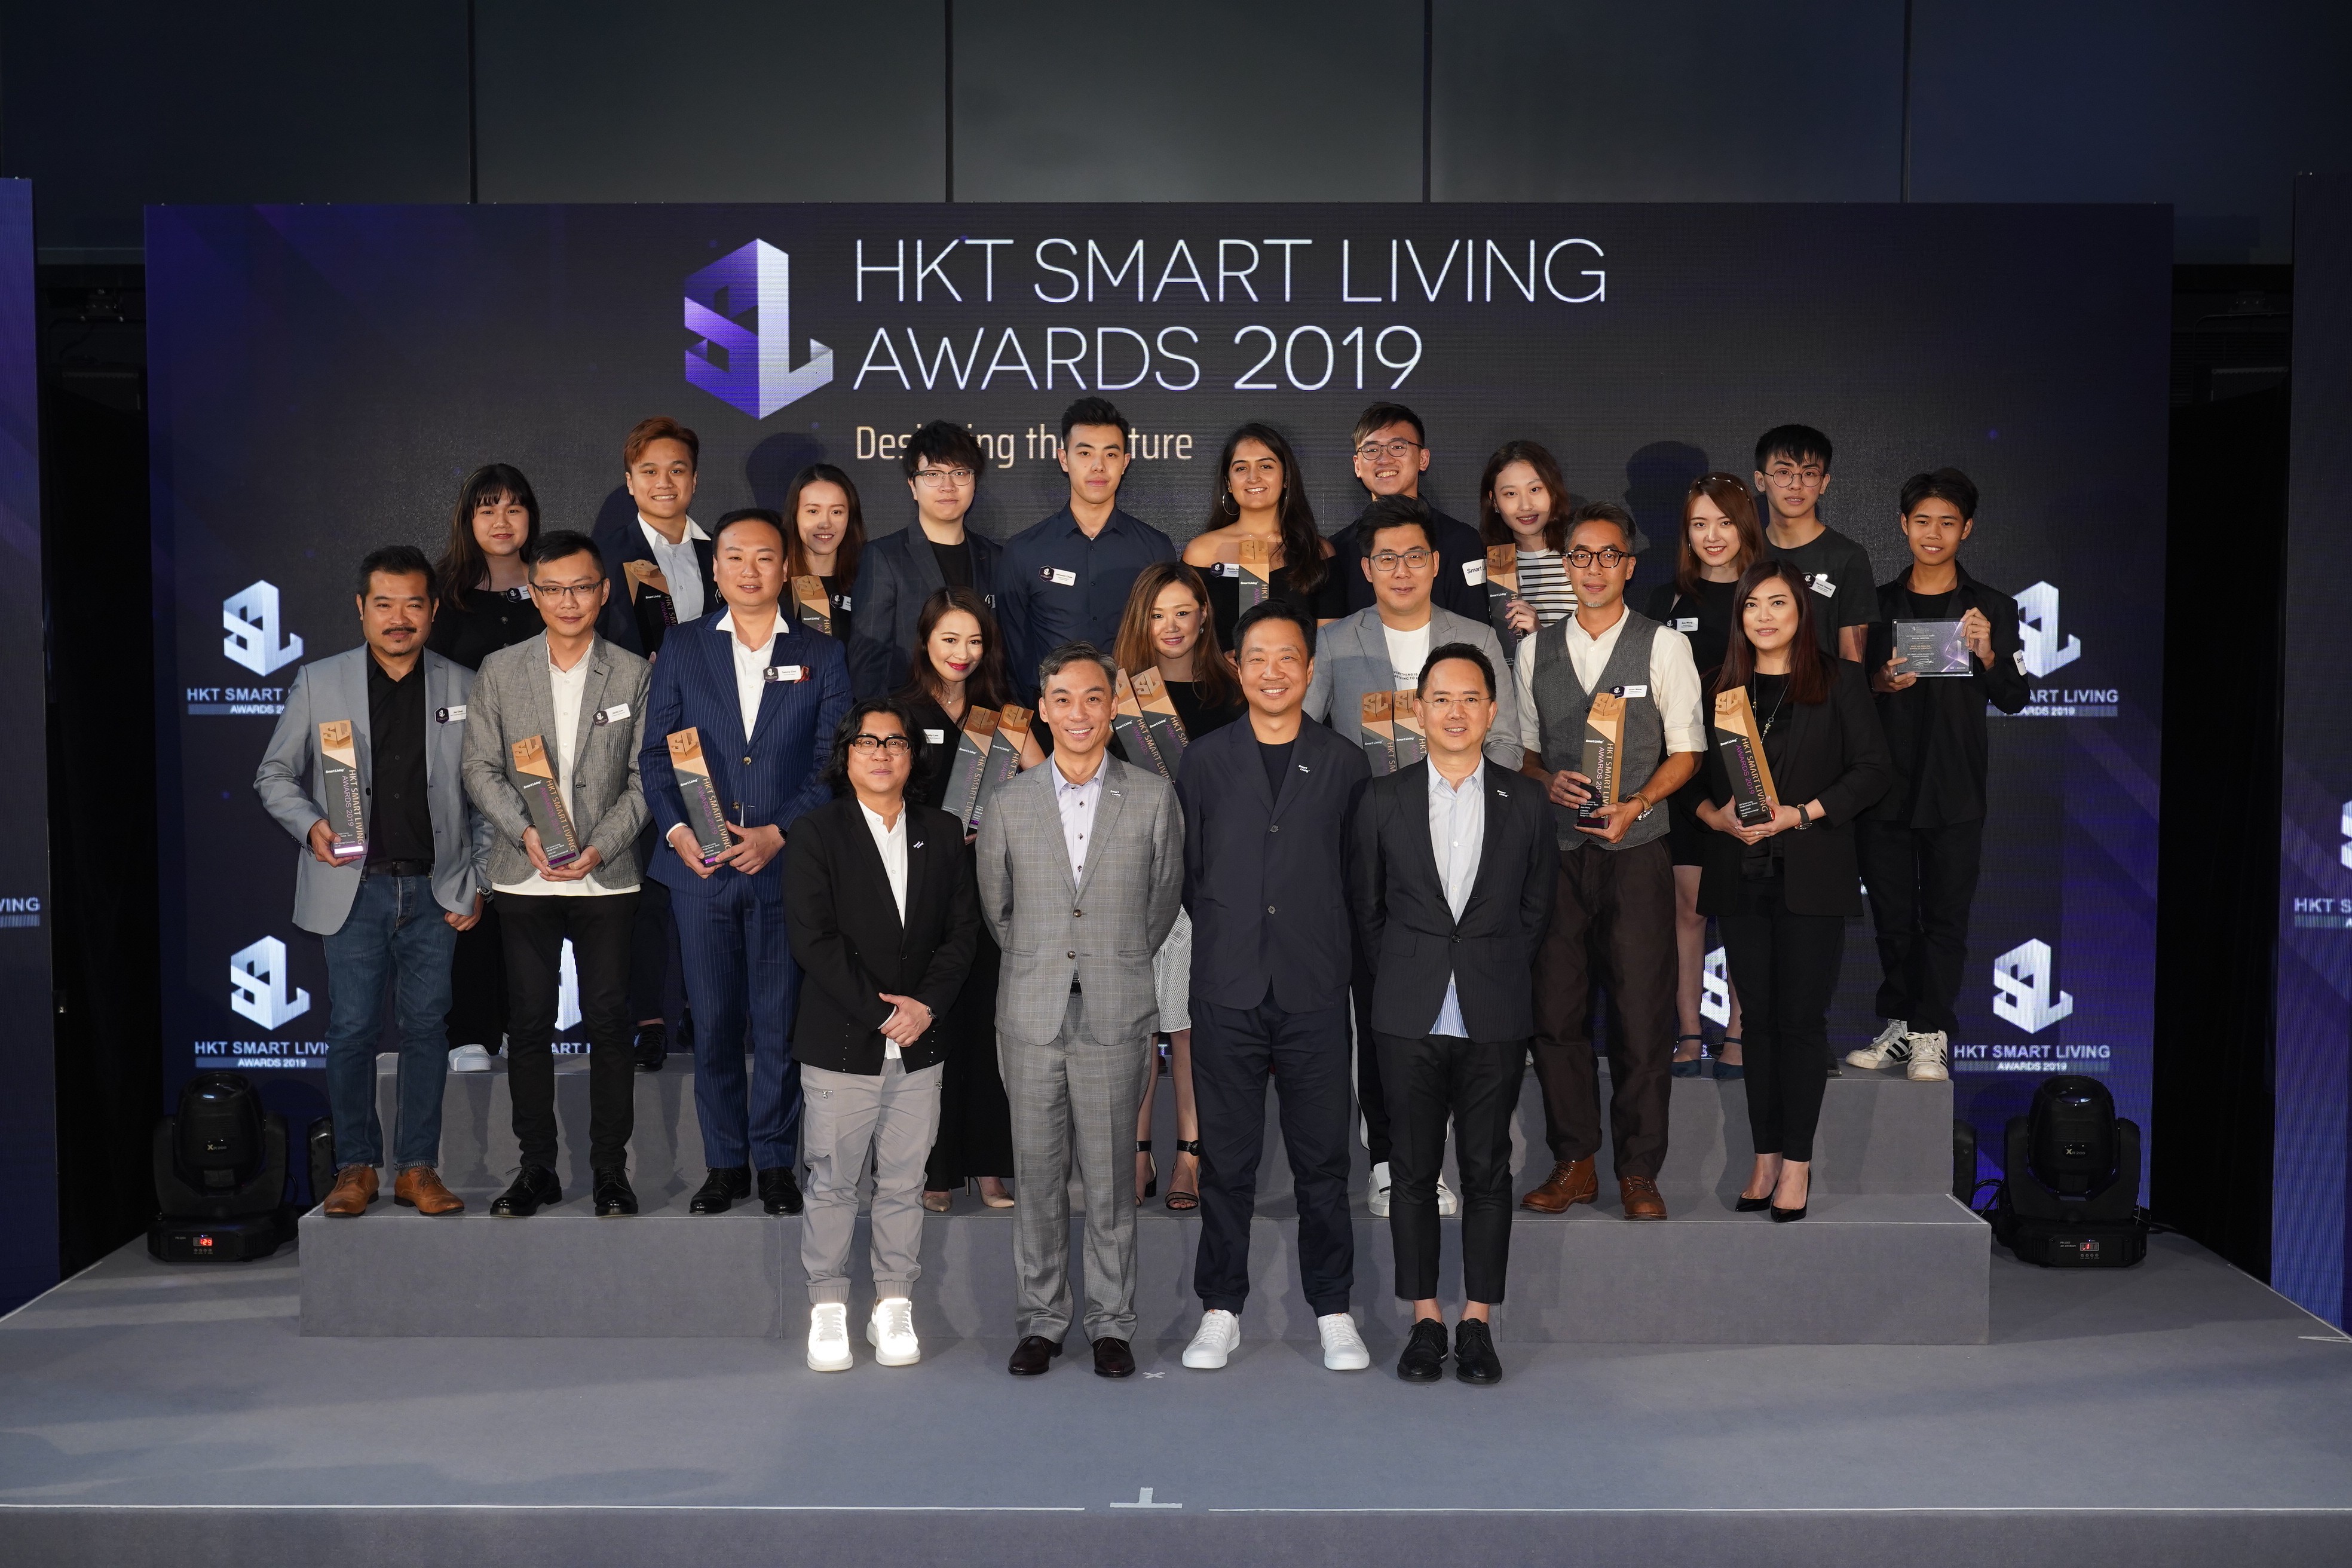 Established professionals and interior design students competed for 16 awards in two categories at HKT Smart Living Awards 2019.